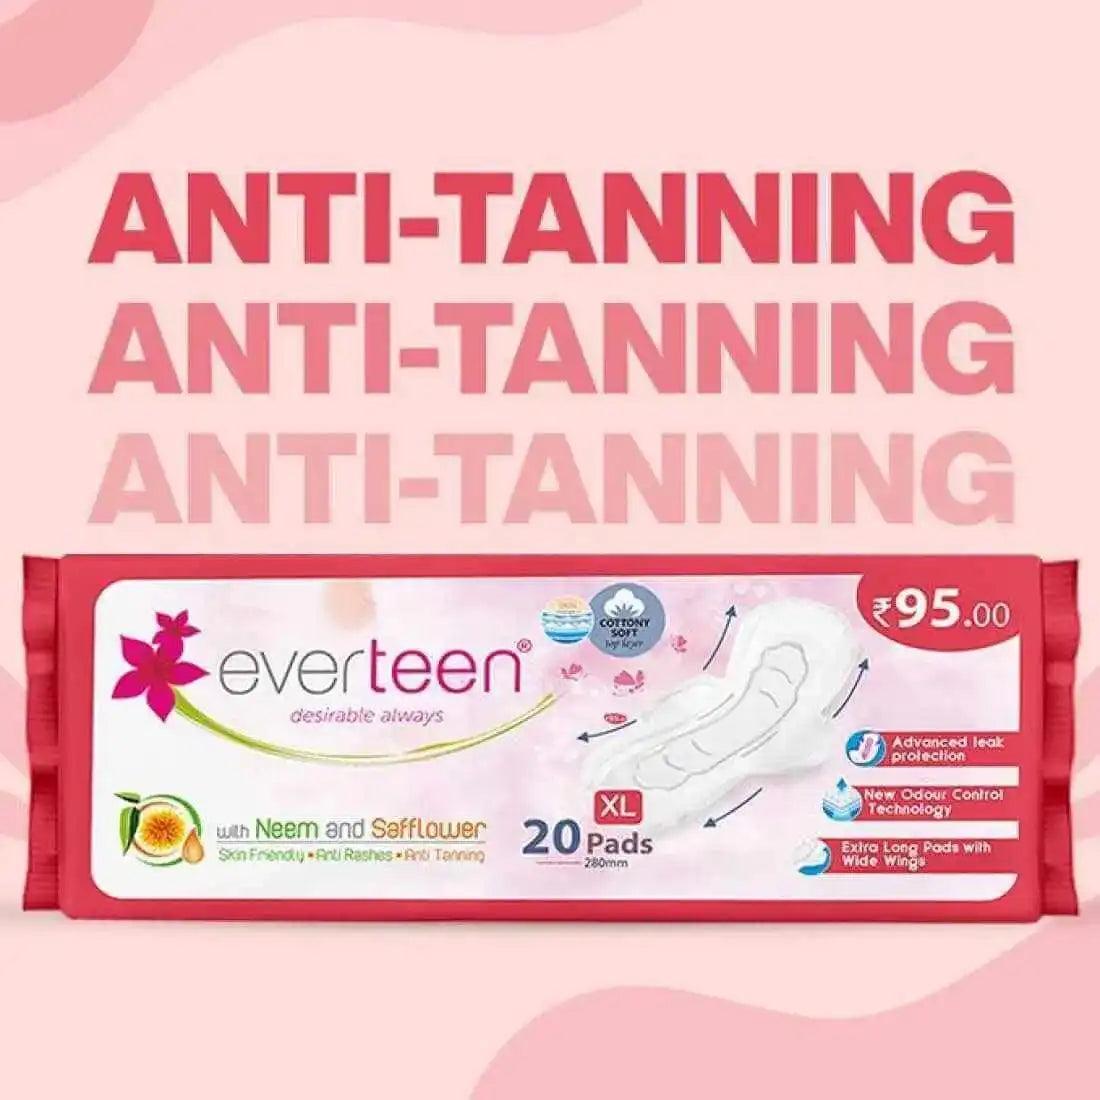 everteen XL Sanitary Napkins with Neem and Safflower are Anti-Tanning and Anti-Rashes In Periods - everteen-neud.com